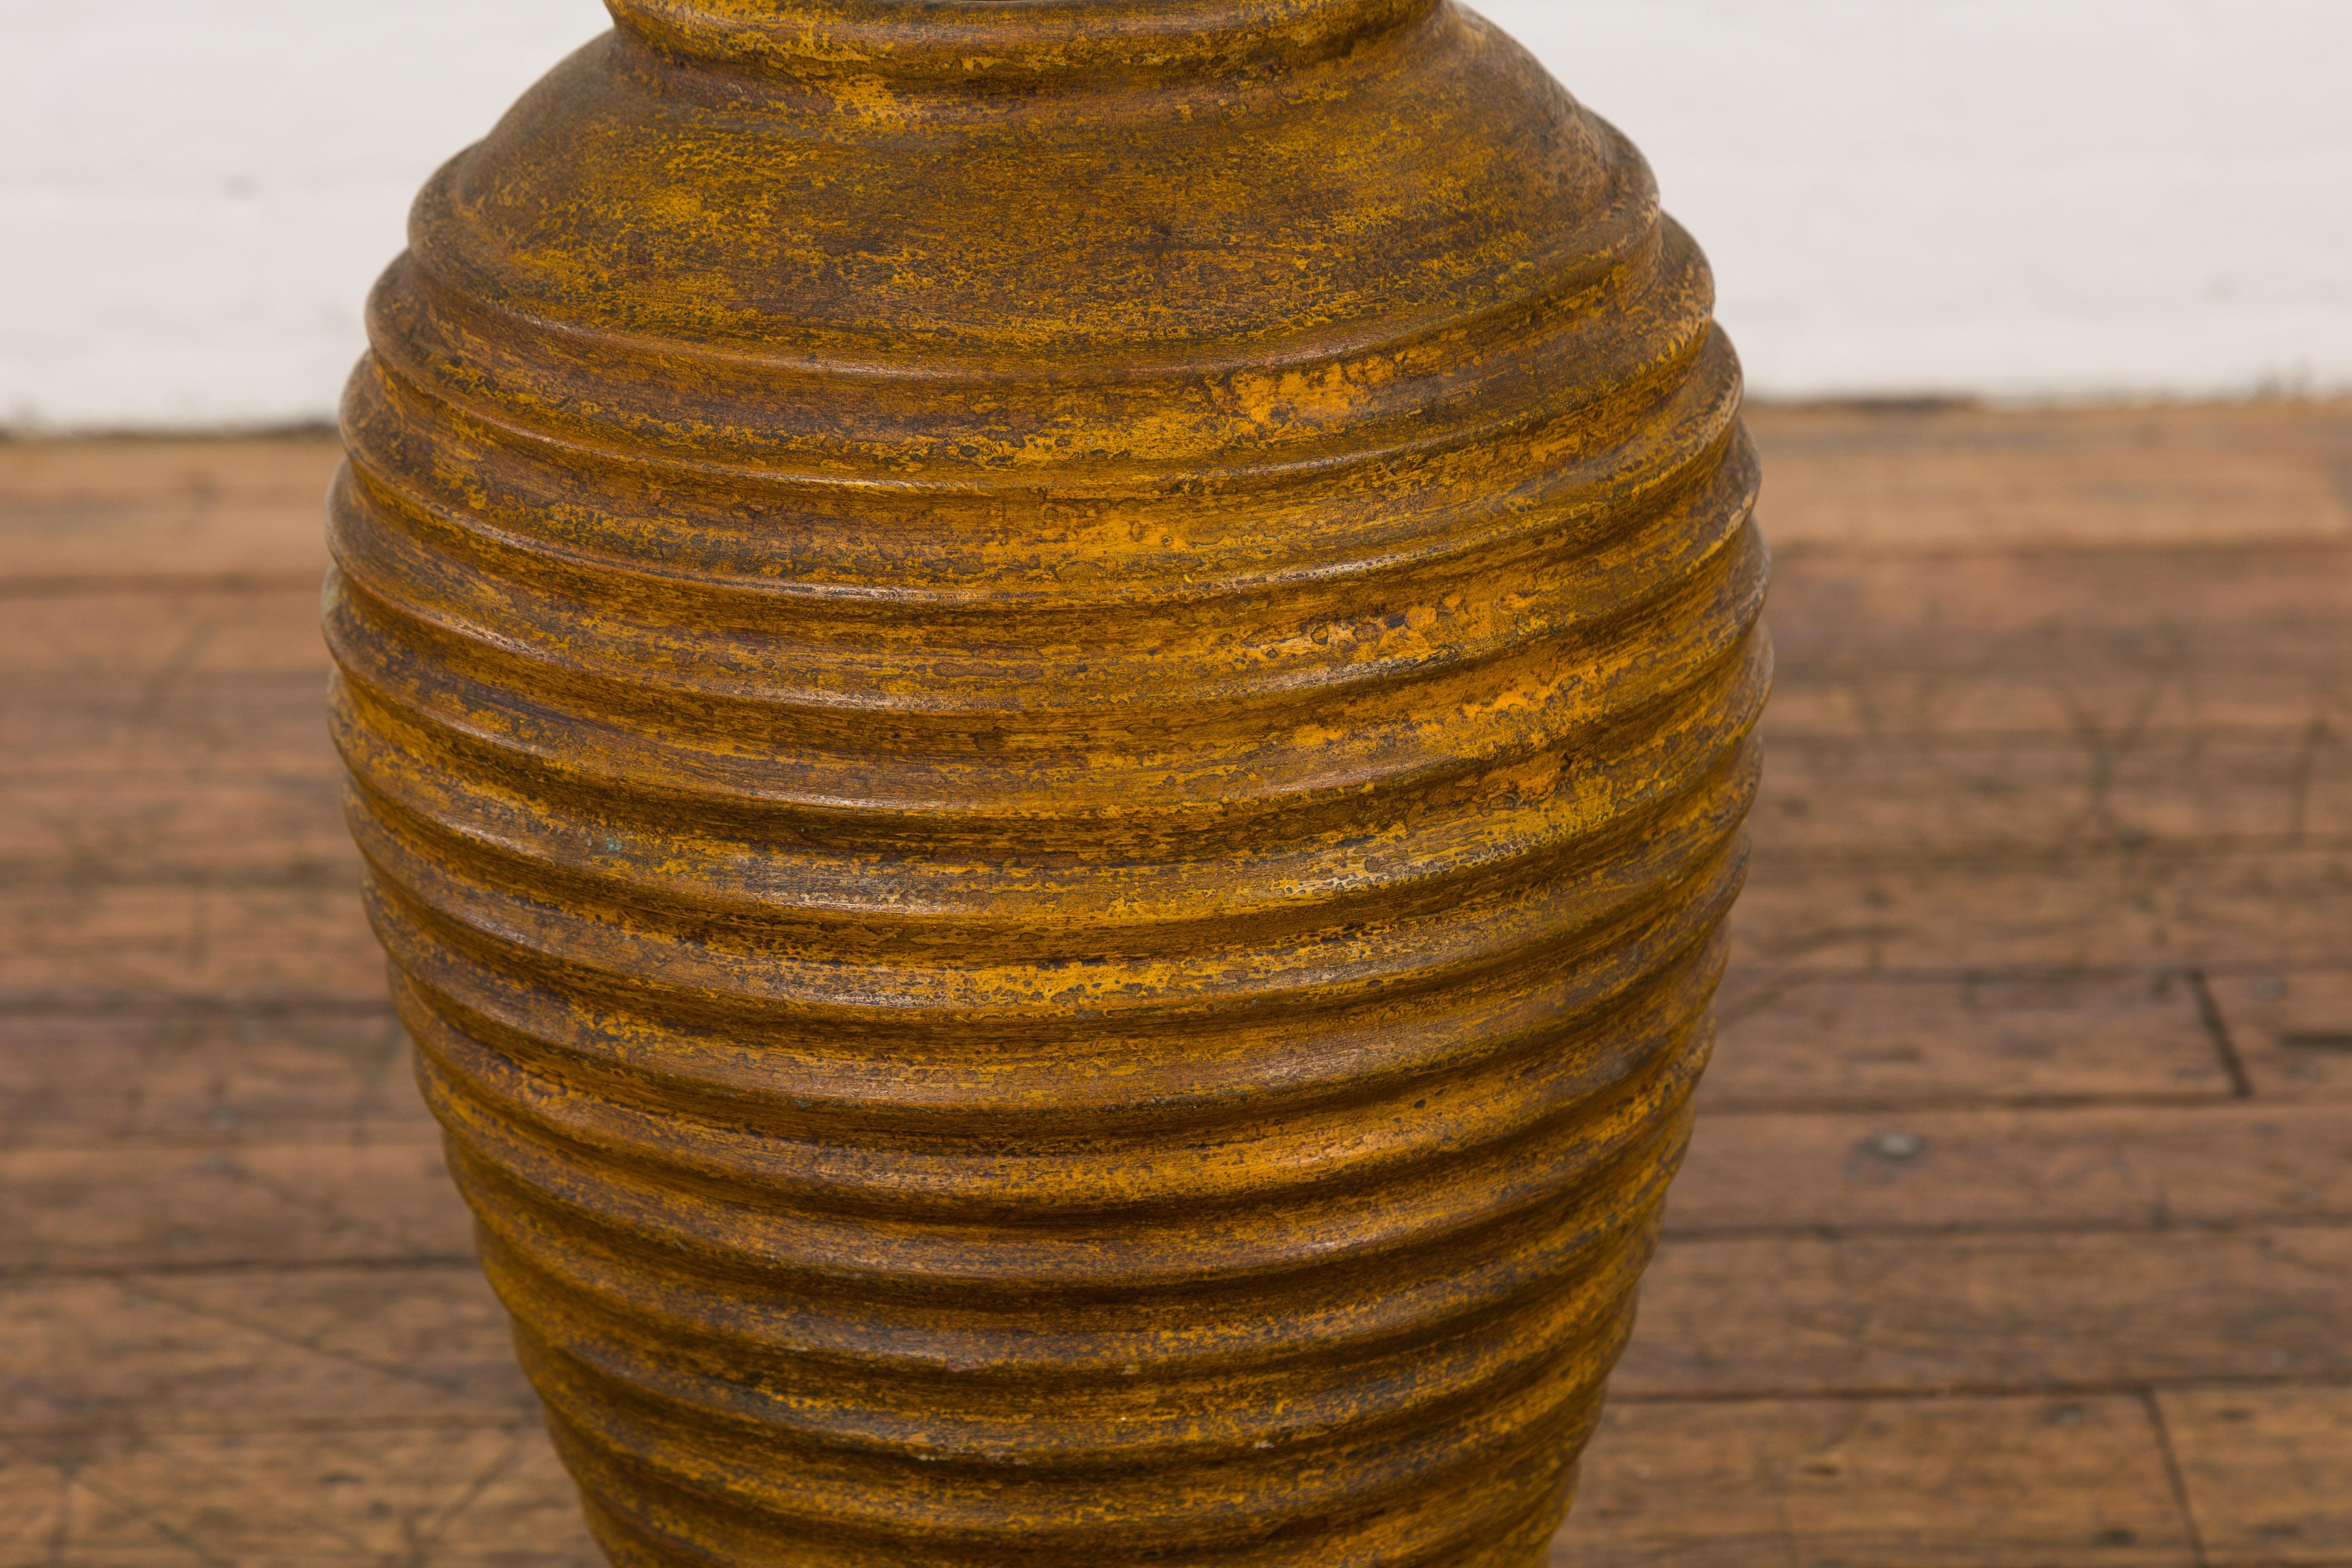 Ceramic Yellow and Brown Storage Vase with Concentric Design and Rustic Character